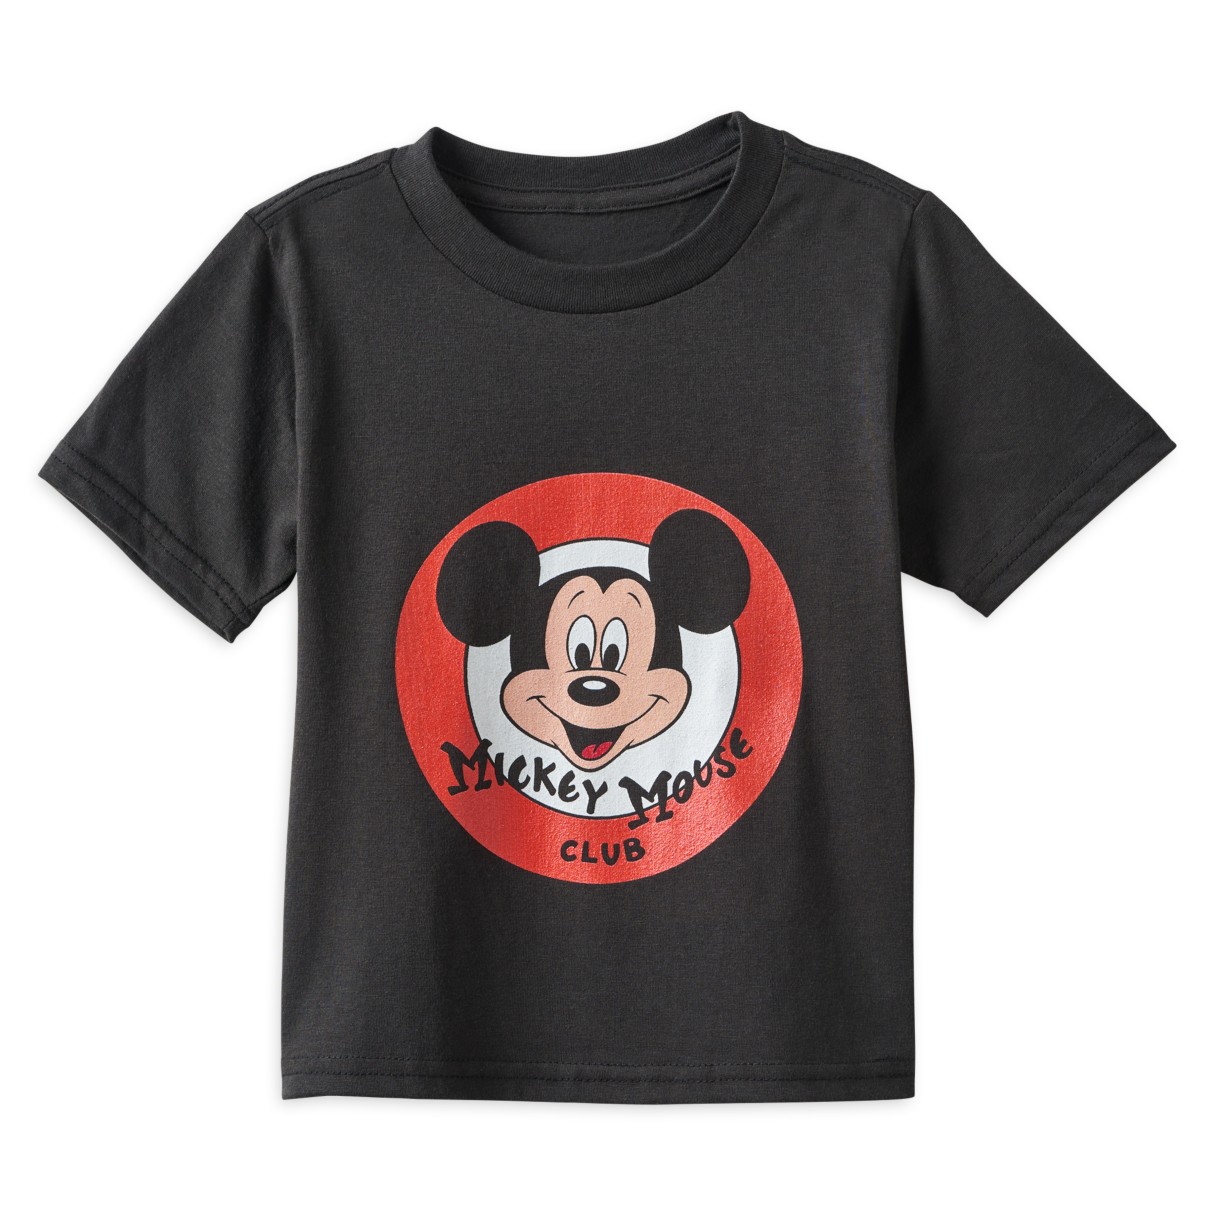 The Mickey Mouse Club Logo T-Shirt for Toddlers